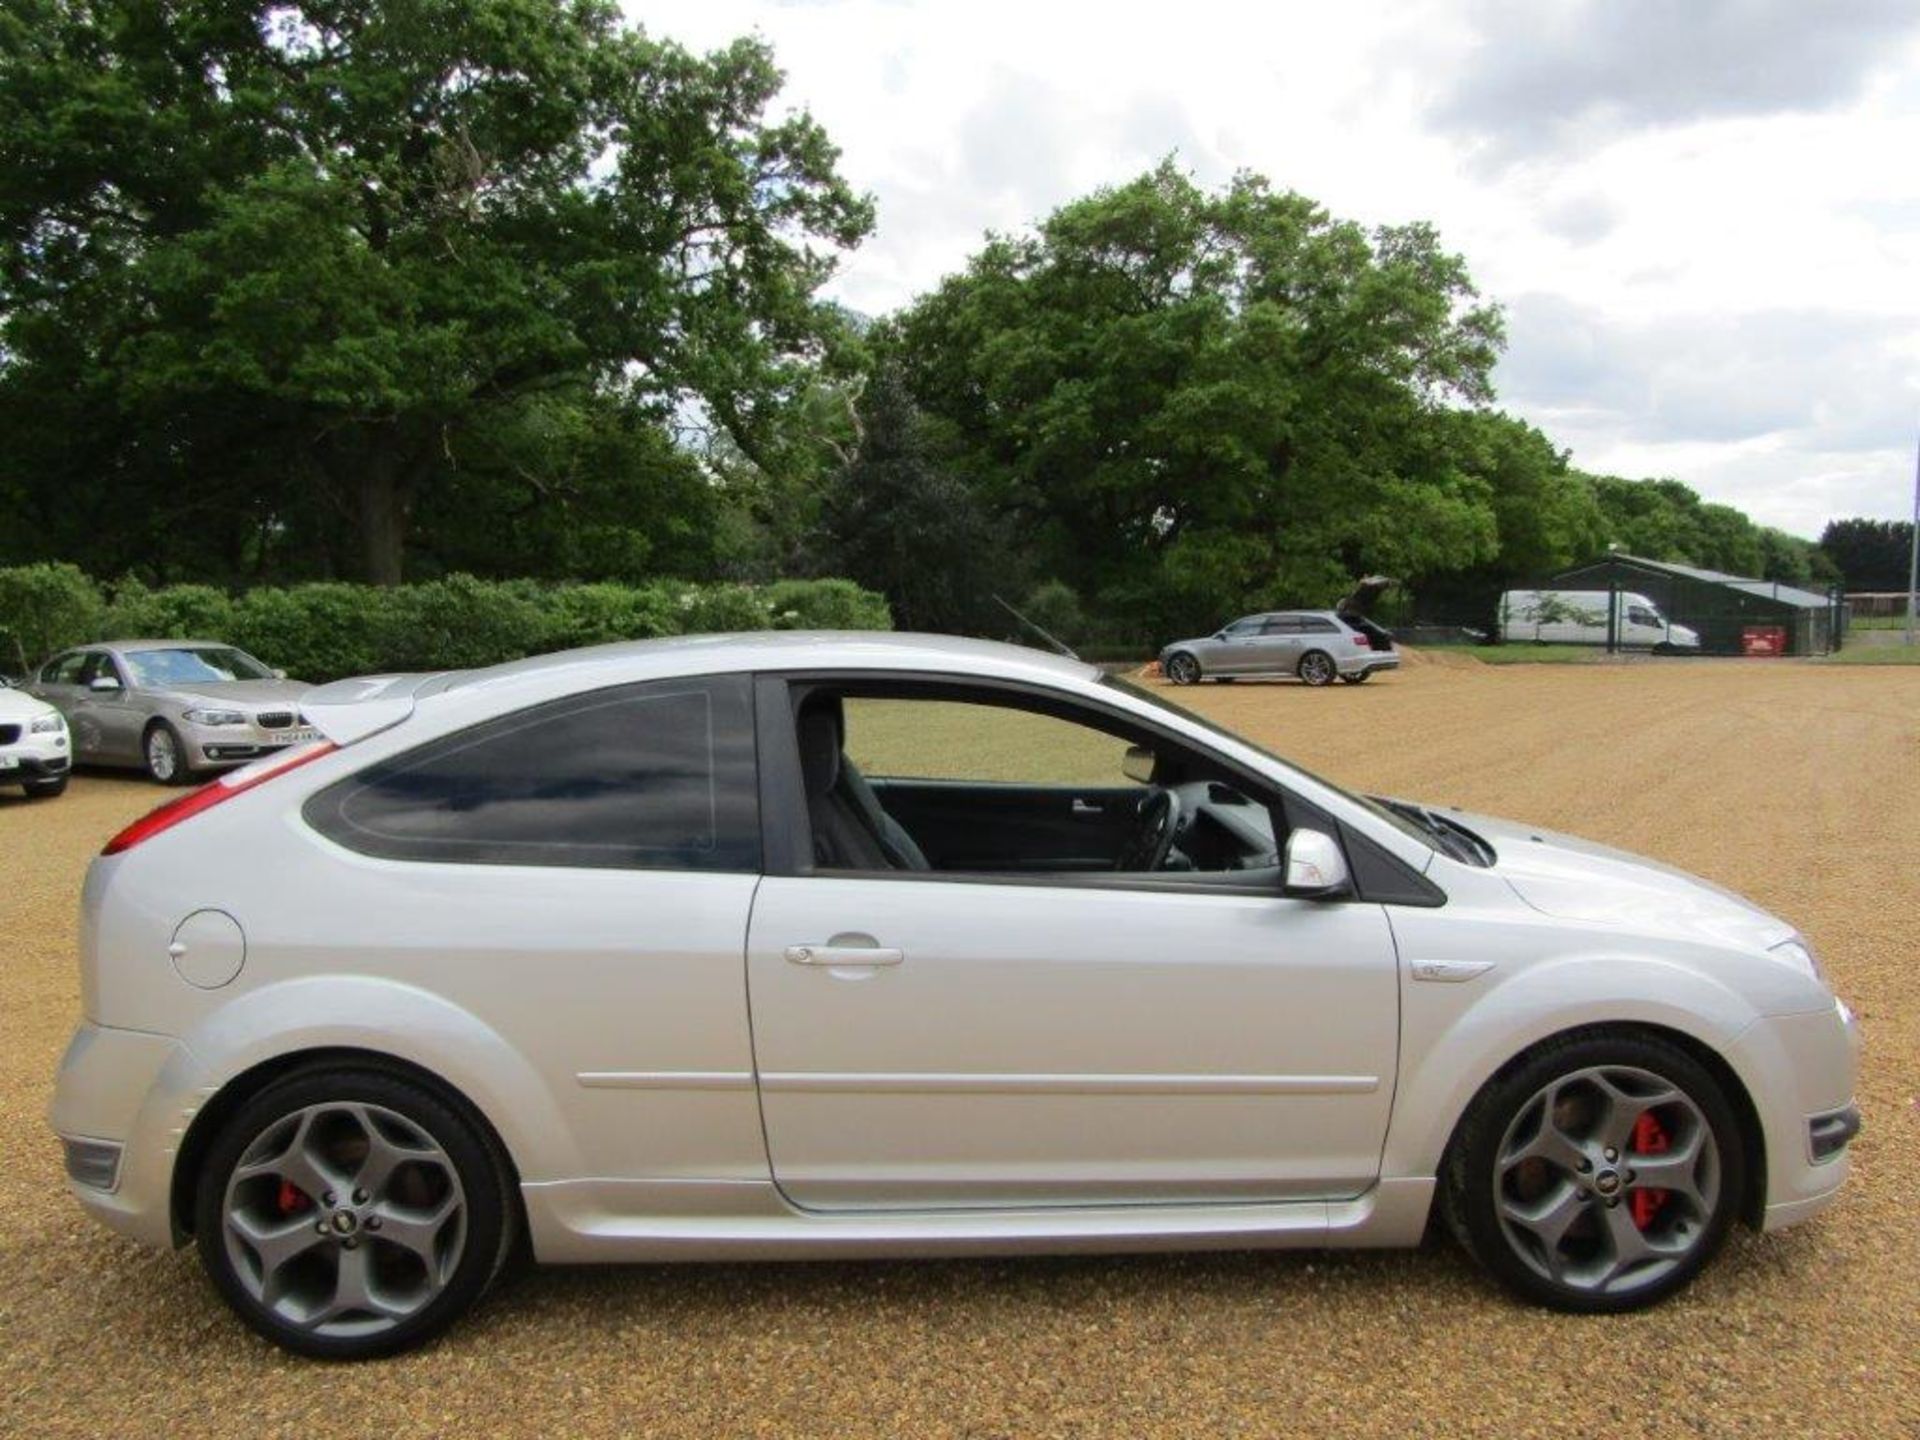 55 06 Ford Focus ST-2 - Image 2 of 20